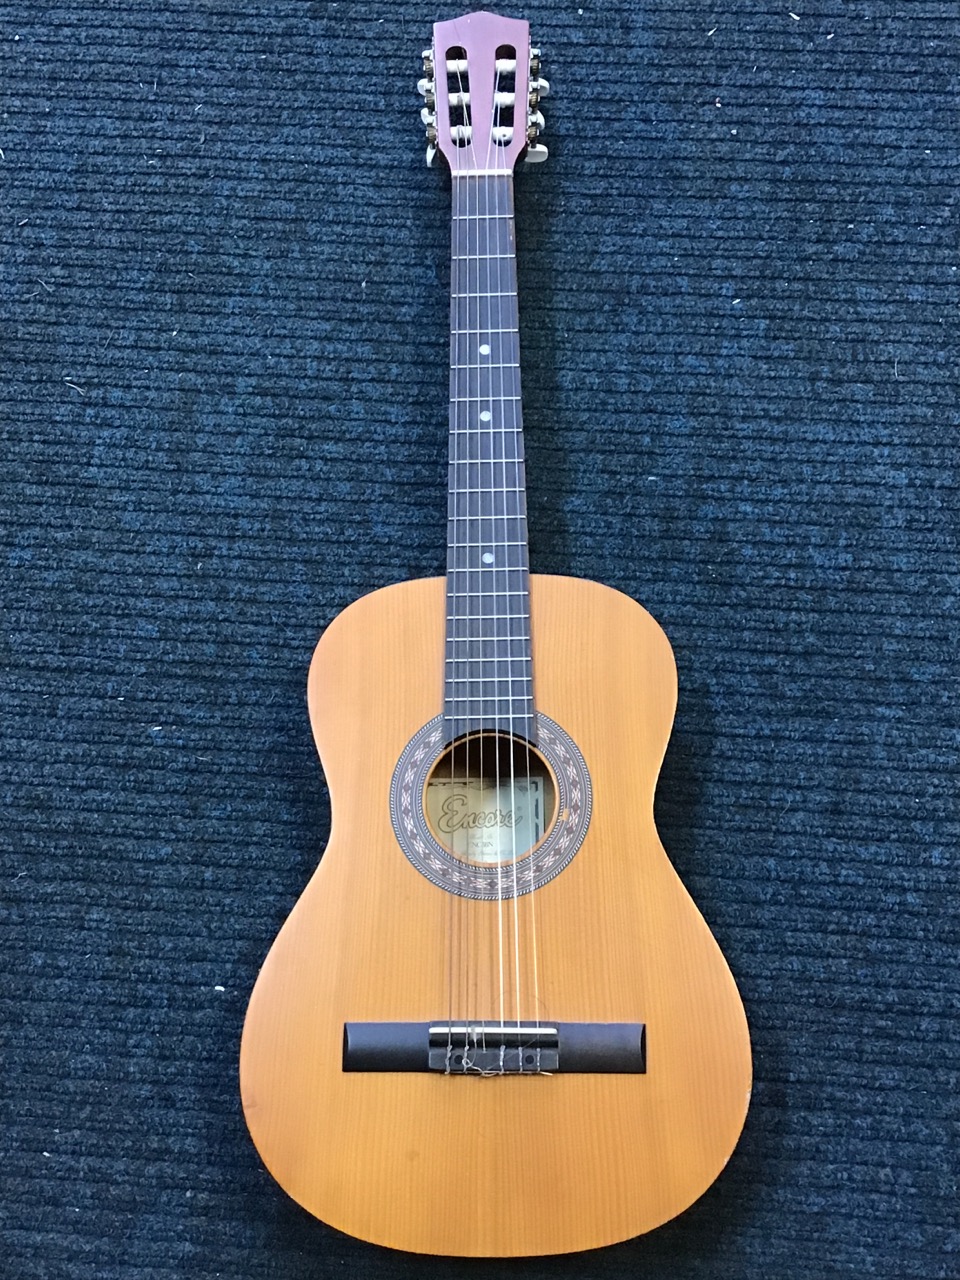 A Romanian nylon strung classical guitar by Encore - model ENC36N, with mosaic style decoration to